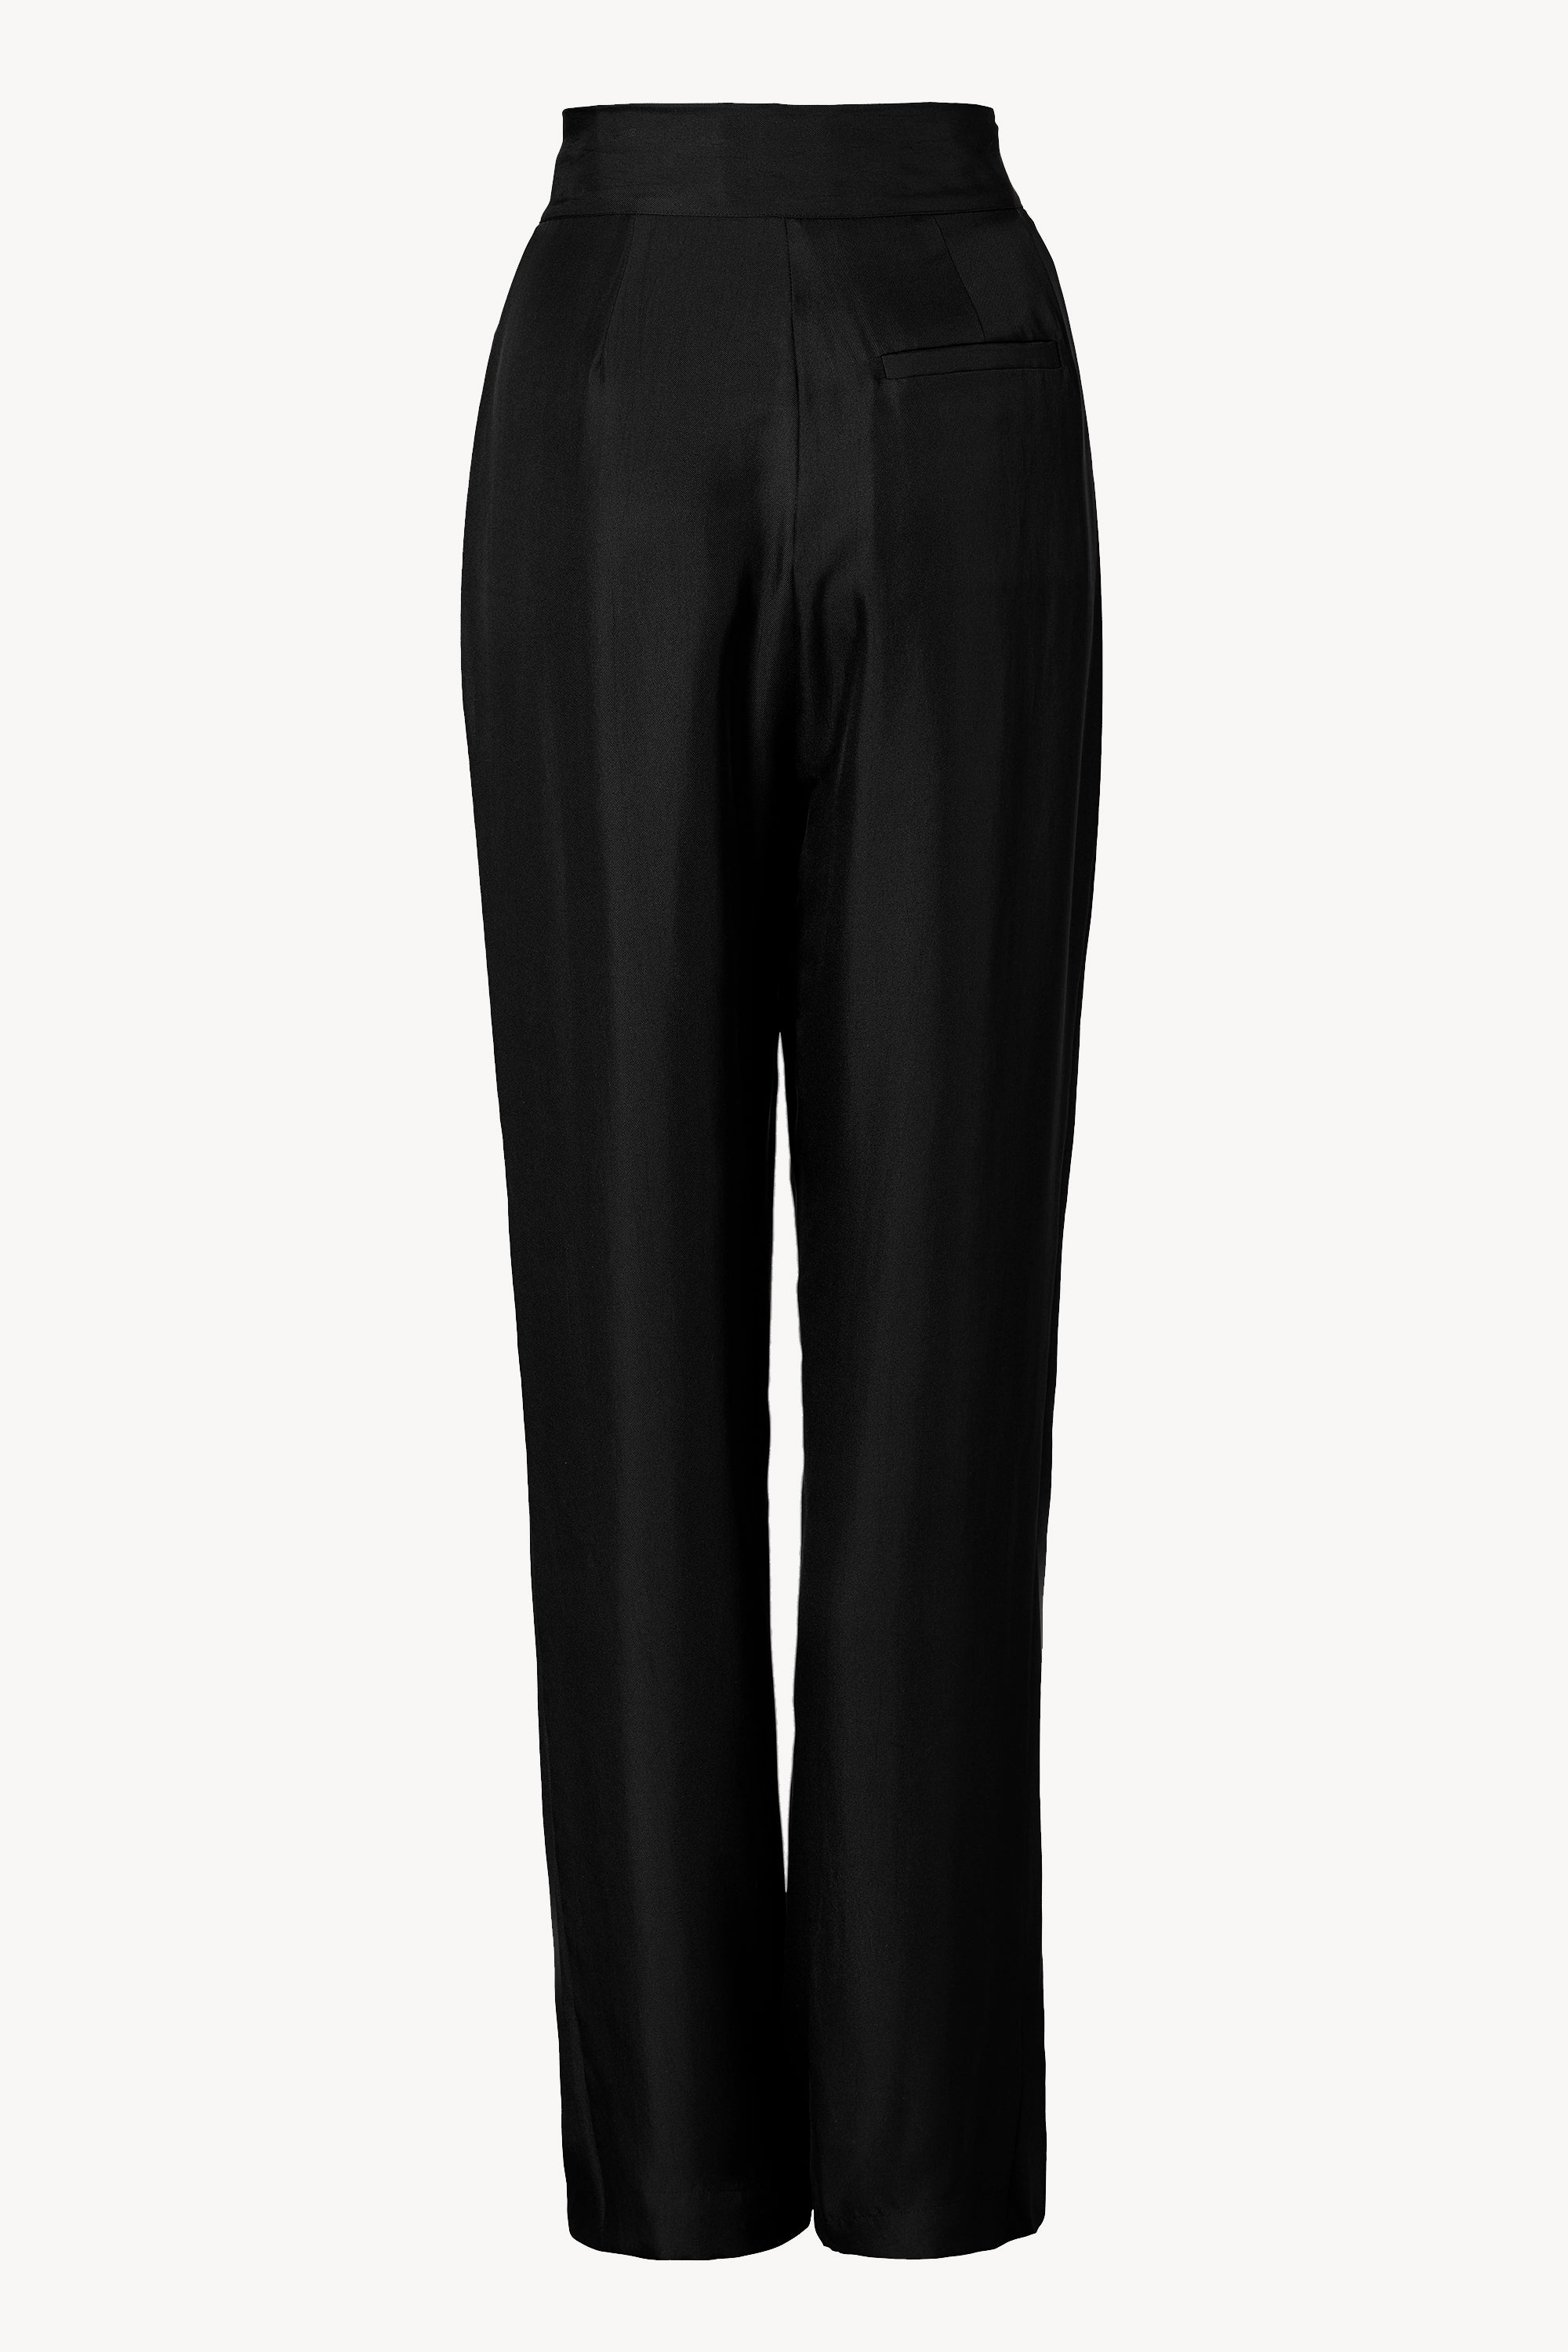 MEN'S PLEATED TAPERED TROUSERS | UNIQLO IN